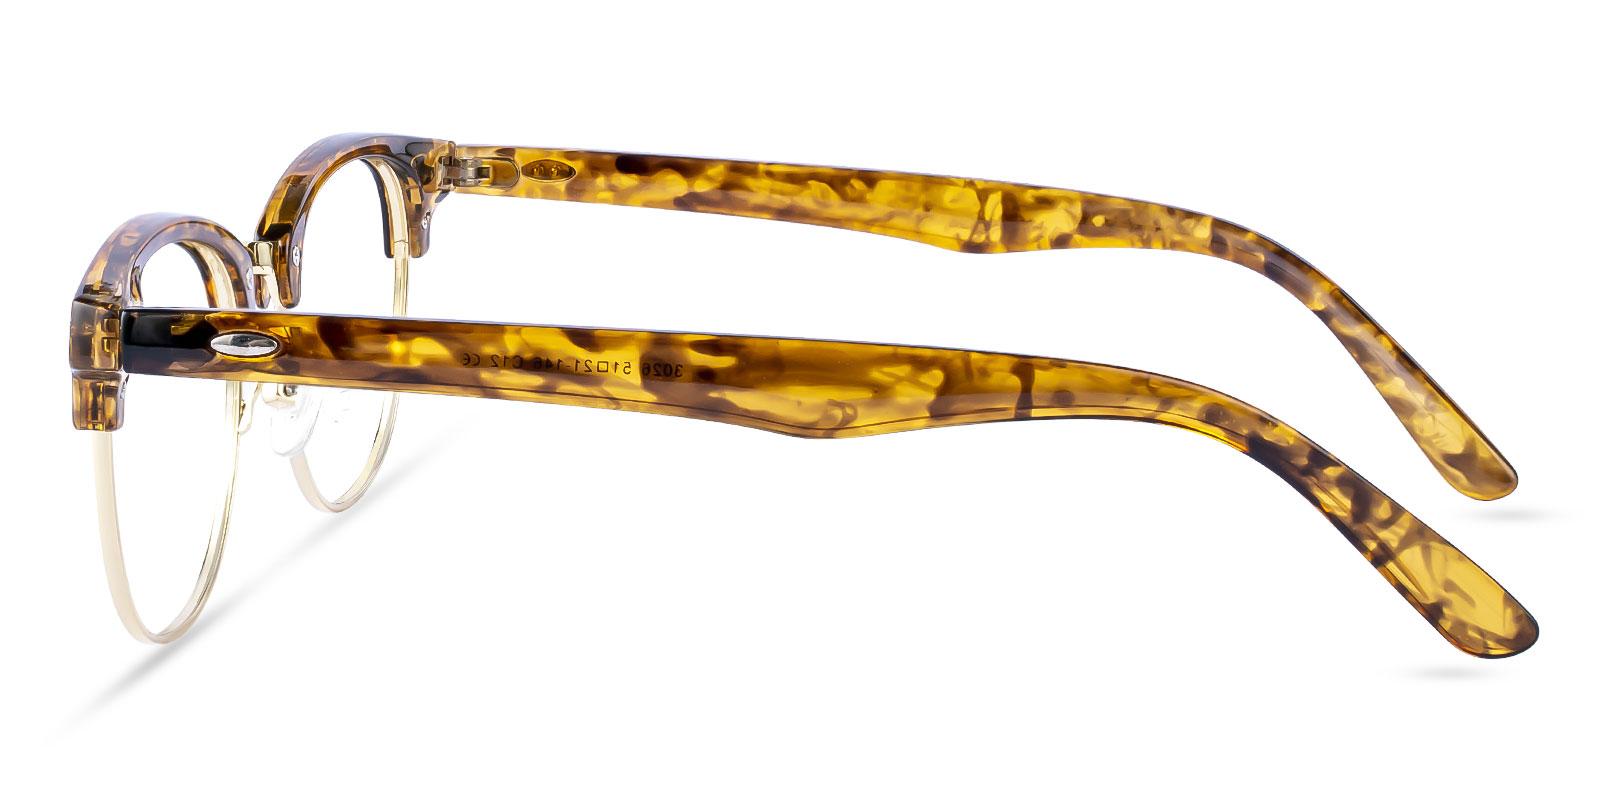 Greeley Gold Metal Eyeglasses , NosePads Frames from ABBE Glasses